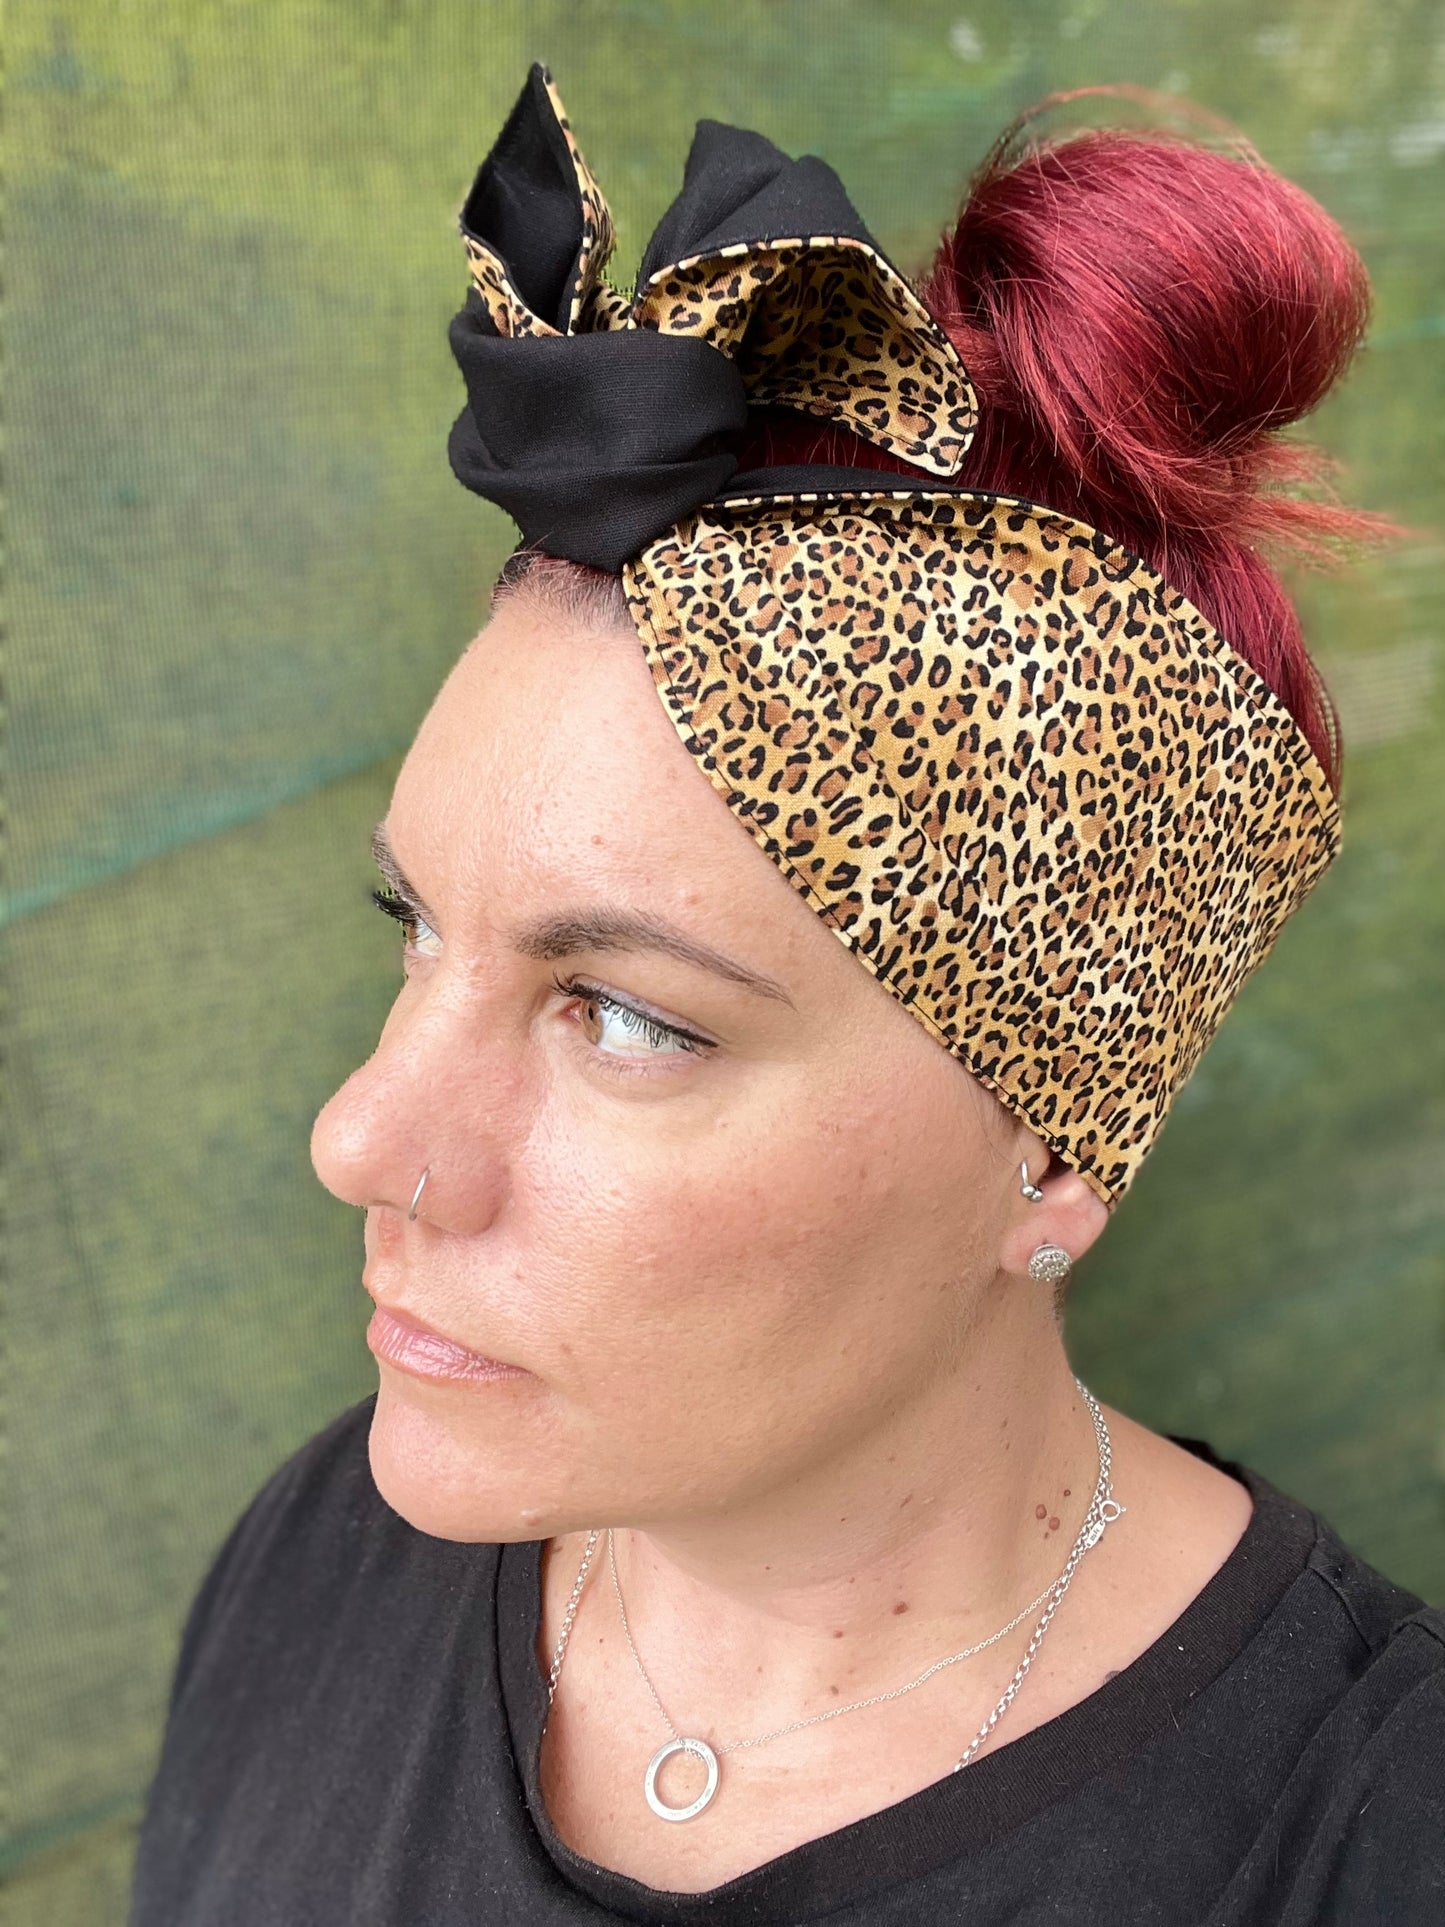 Leopard on Black Boho Wire Headband - Bae Bands Australia Twist Bow Wire Headband allows for your headband to stay in place all day with no headaches,